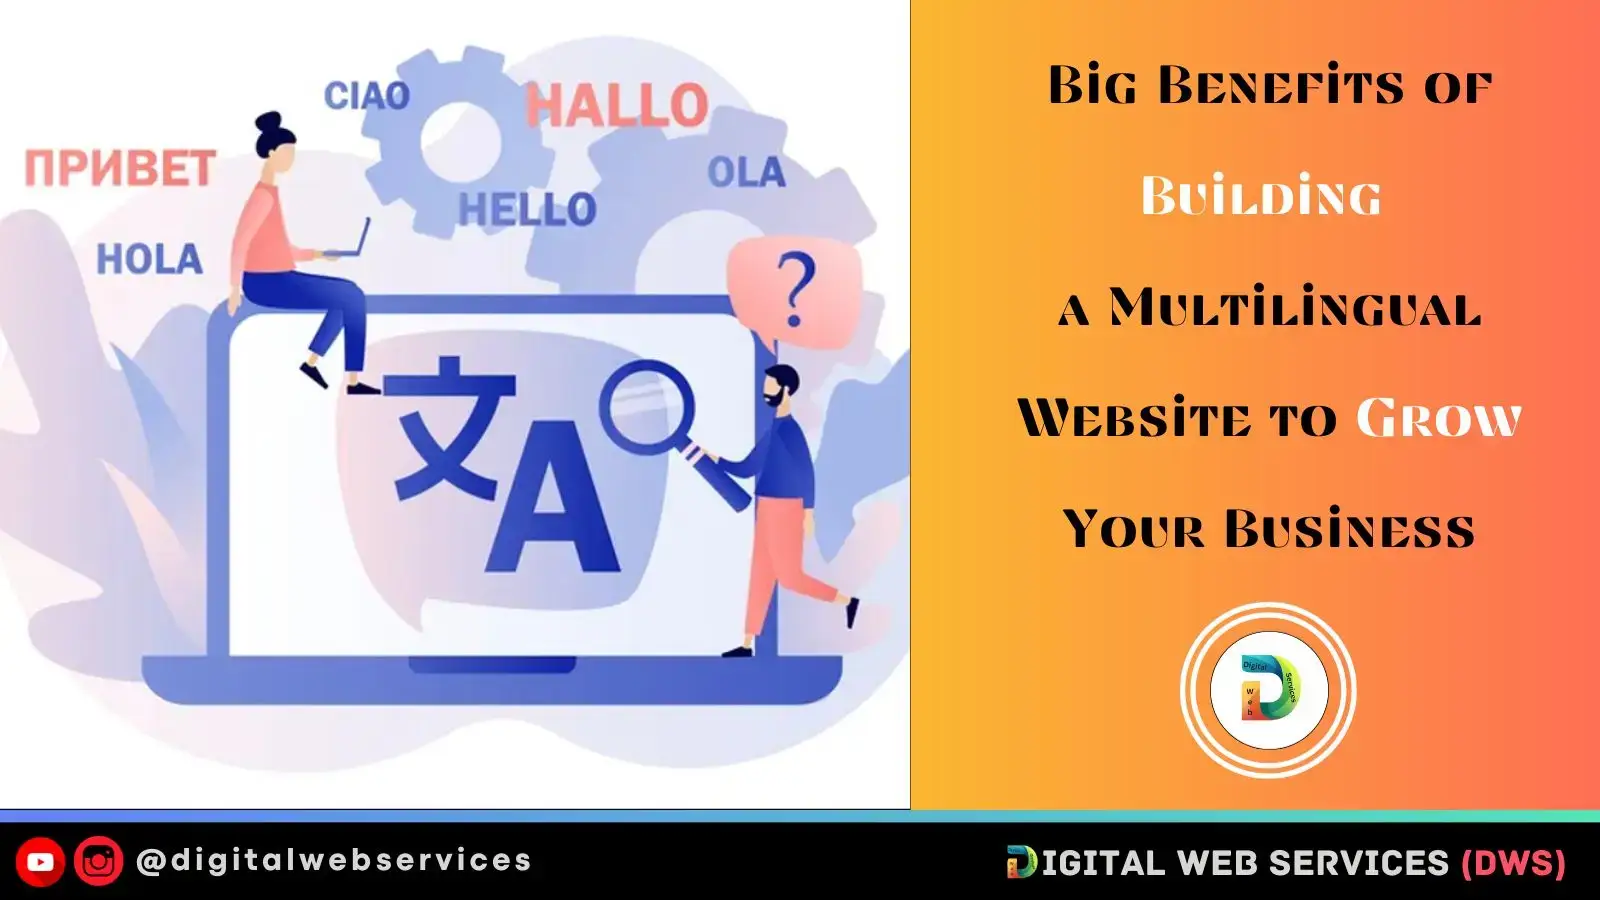 Big Benefits of Building a Multilingual Website to Grow Your Business